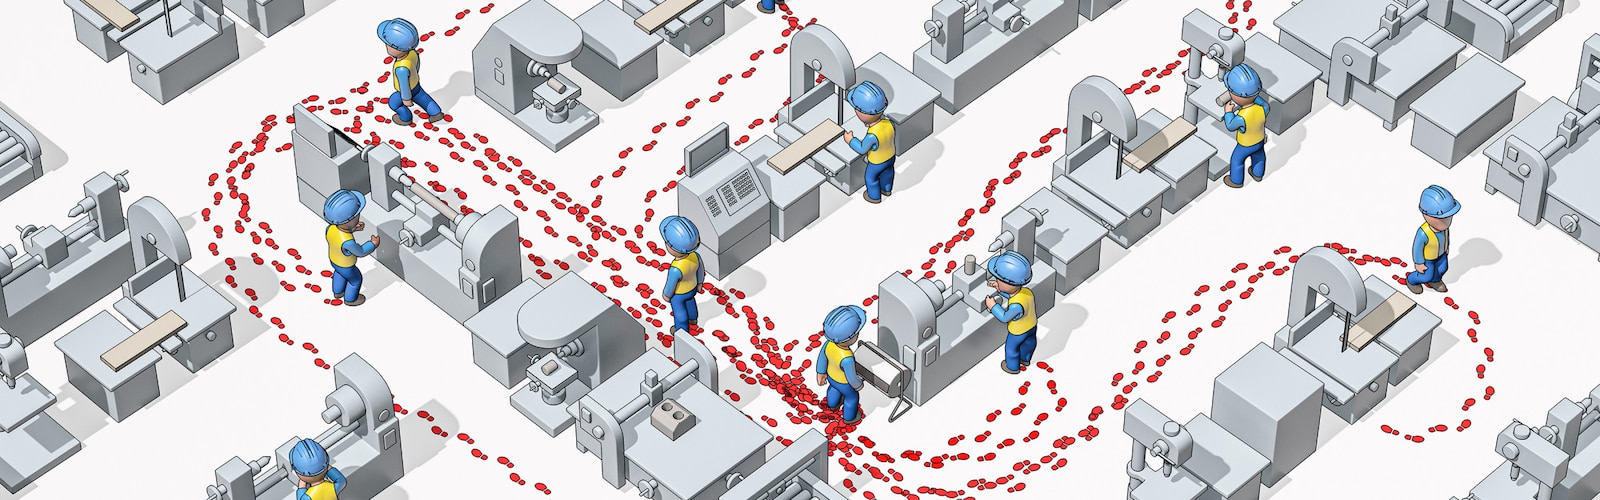 Illustrated image of industry workers in safety helmets seen from above in an industrial environment with their footprints visible to illustrate their movements.